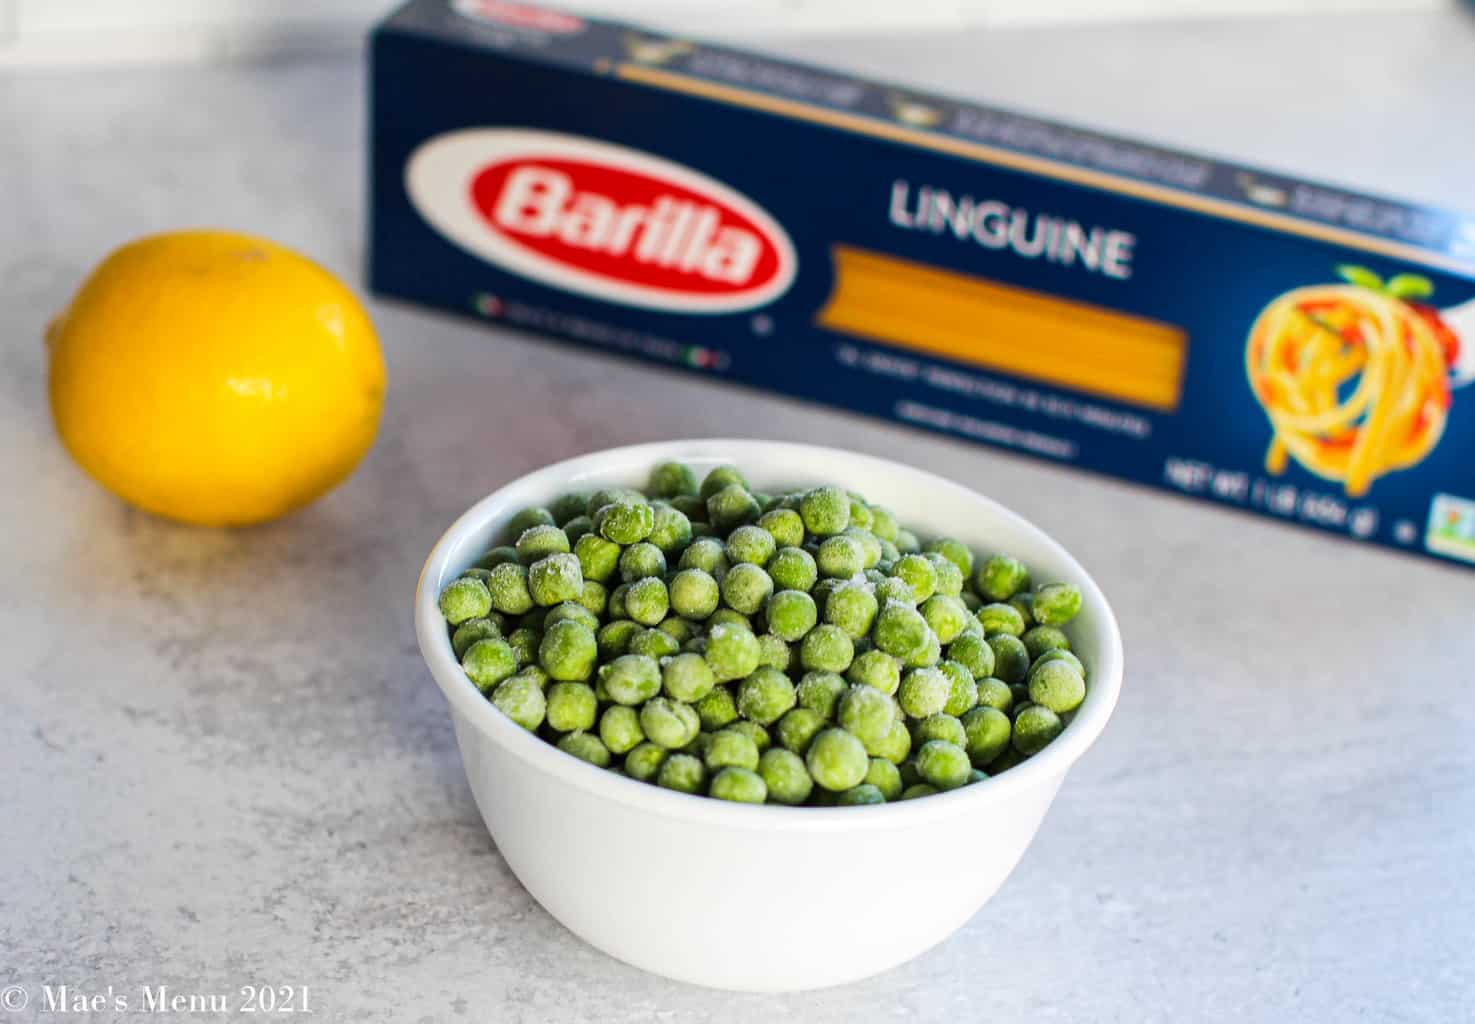 a small white dish of frozen green peas, a whole lemon, and a package of barilla linguine